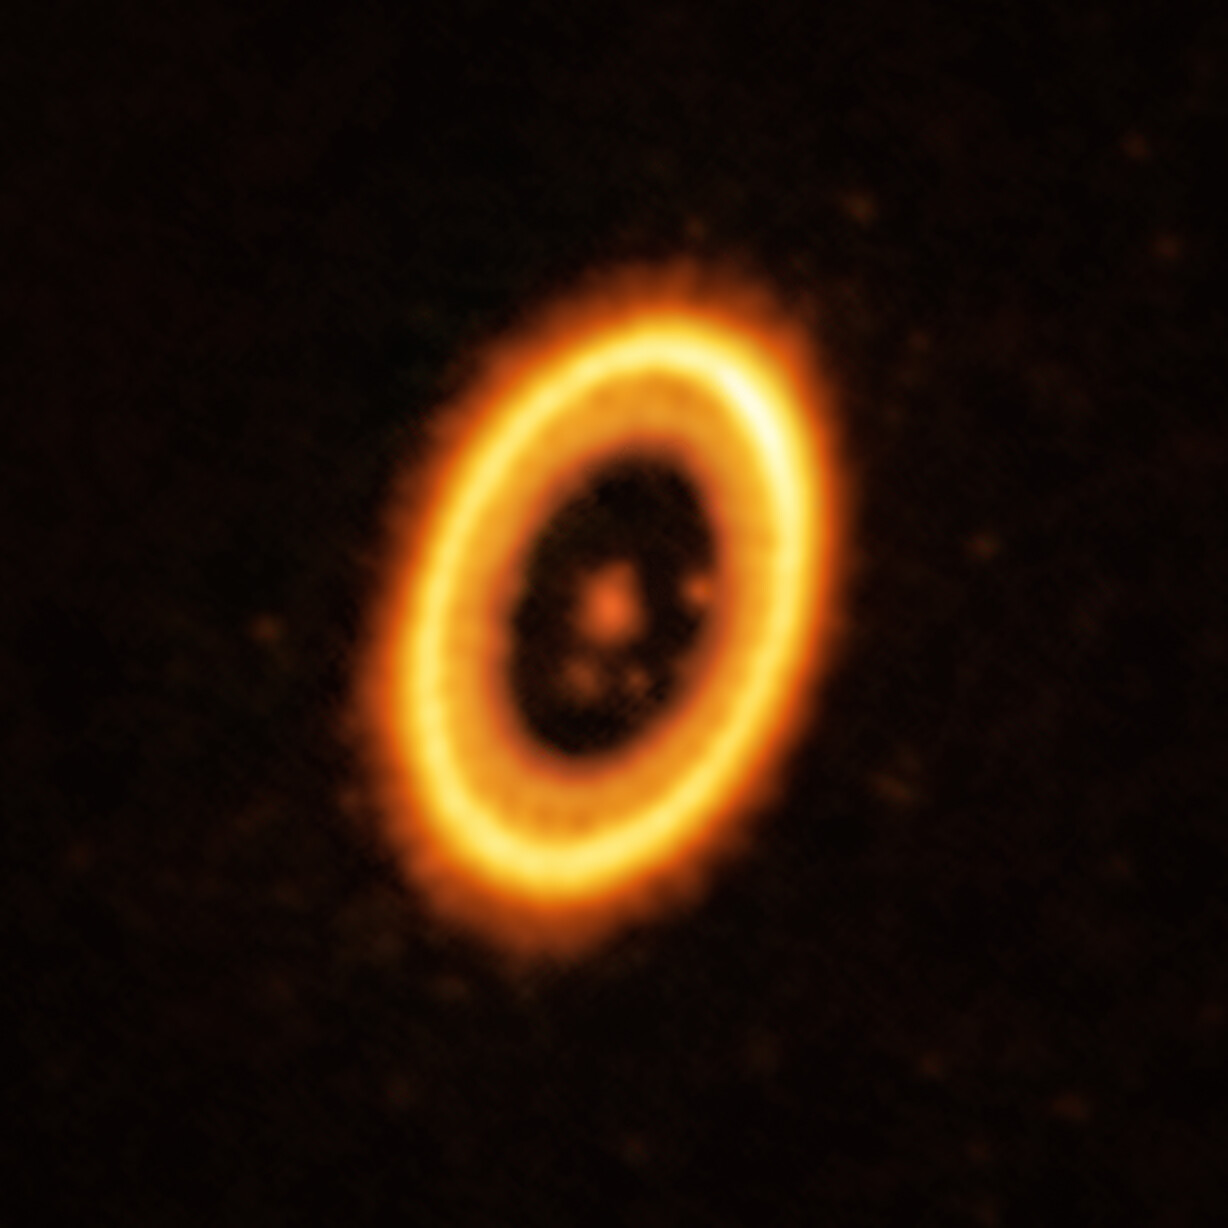 This image, taken with the Atacama Large Millimeter/submillimeter Array (ALMA), in which ESO is a partner, shows the young planetary system PDS 70, located nearly 400 light-years away from Earth. The system features a star at its centre, around which the planet PDS 70 b is orbiting. On the same orbit as PDS 70b, astronomers have detected a cloud of debris that could be the building blocks of a new planet or the remnants of one already formed. The ring-like structure that dominates the image is a circumstellar disc of material, out of which planets are forming. There is in fact another planet in this system: PDS 70c, seen at 3 o’clock right next to the inner rim of the disc. Credit: ALMA (ESO/NAOJ/NRAO) / Balsalobre-Ruza et al.